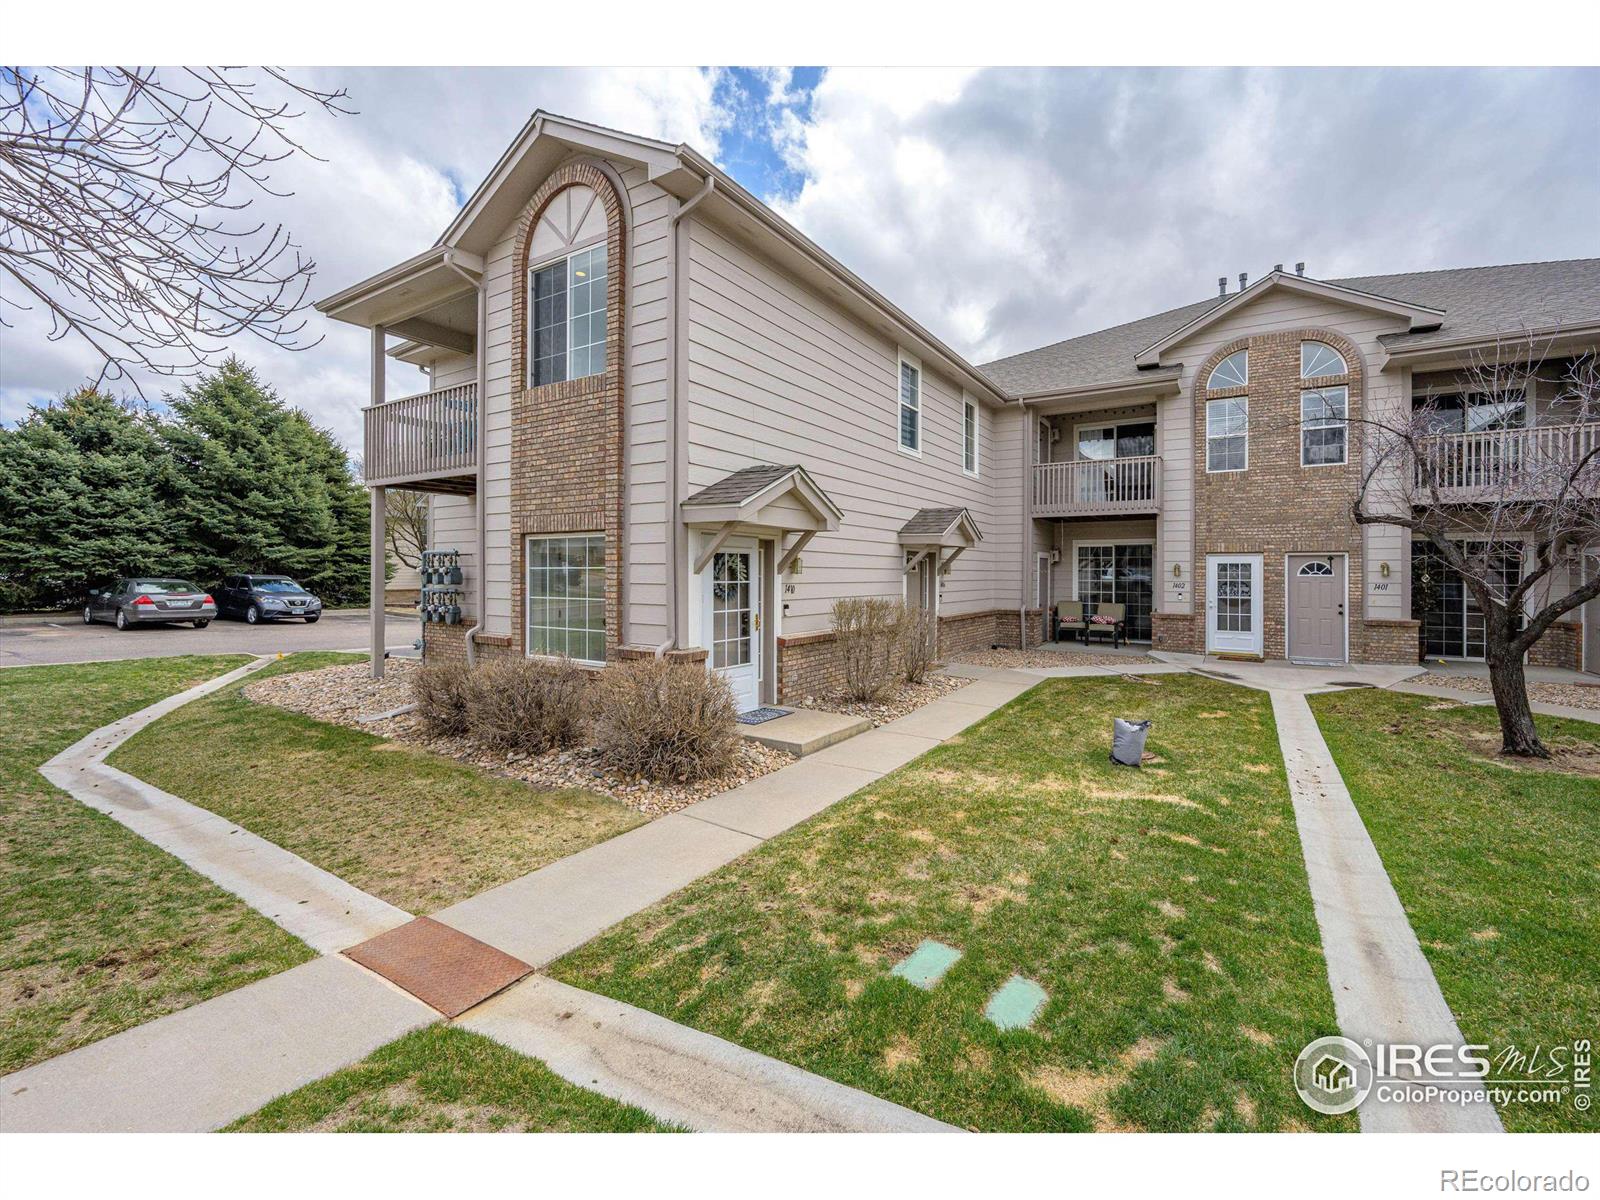 Report Image for 5151  29th Street,Greeley, Colorado